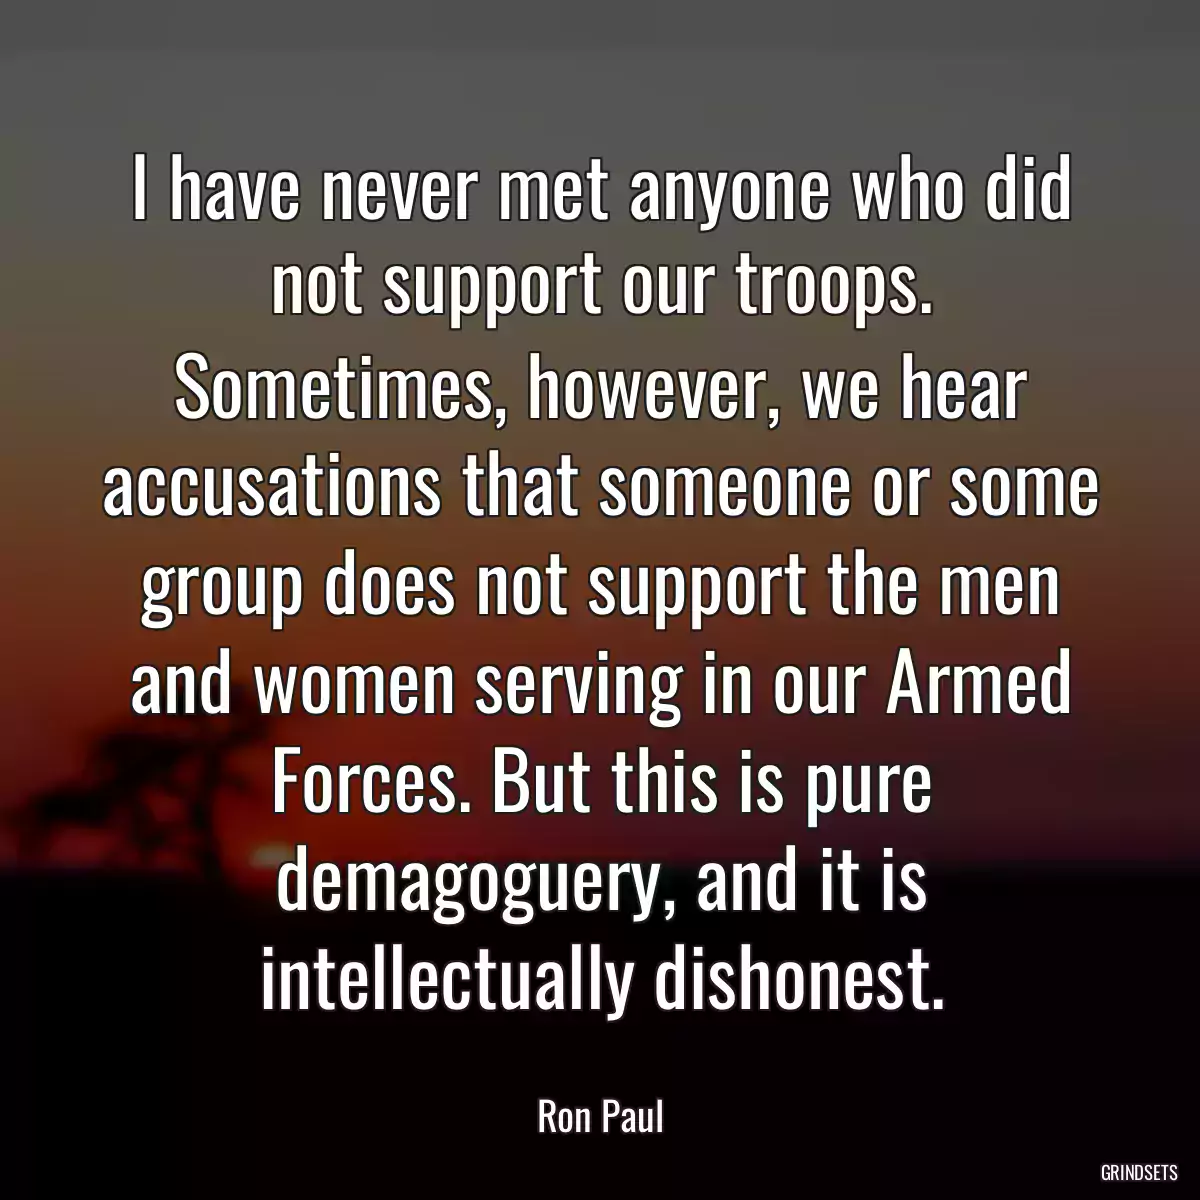 I have never met anyone who did not support our troops. Sometimes, however, we hear accusations that someone or some group does not support the men and women serving in our Armed Forces. But this is pure demagoguery, and it is intellectually dishonest.